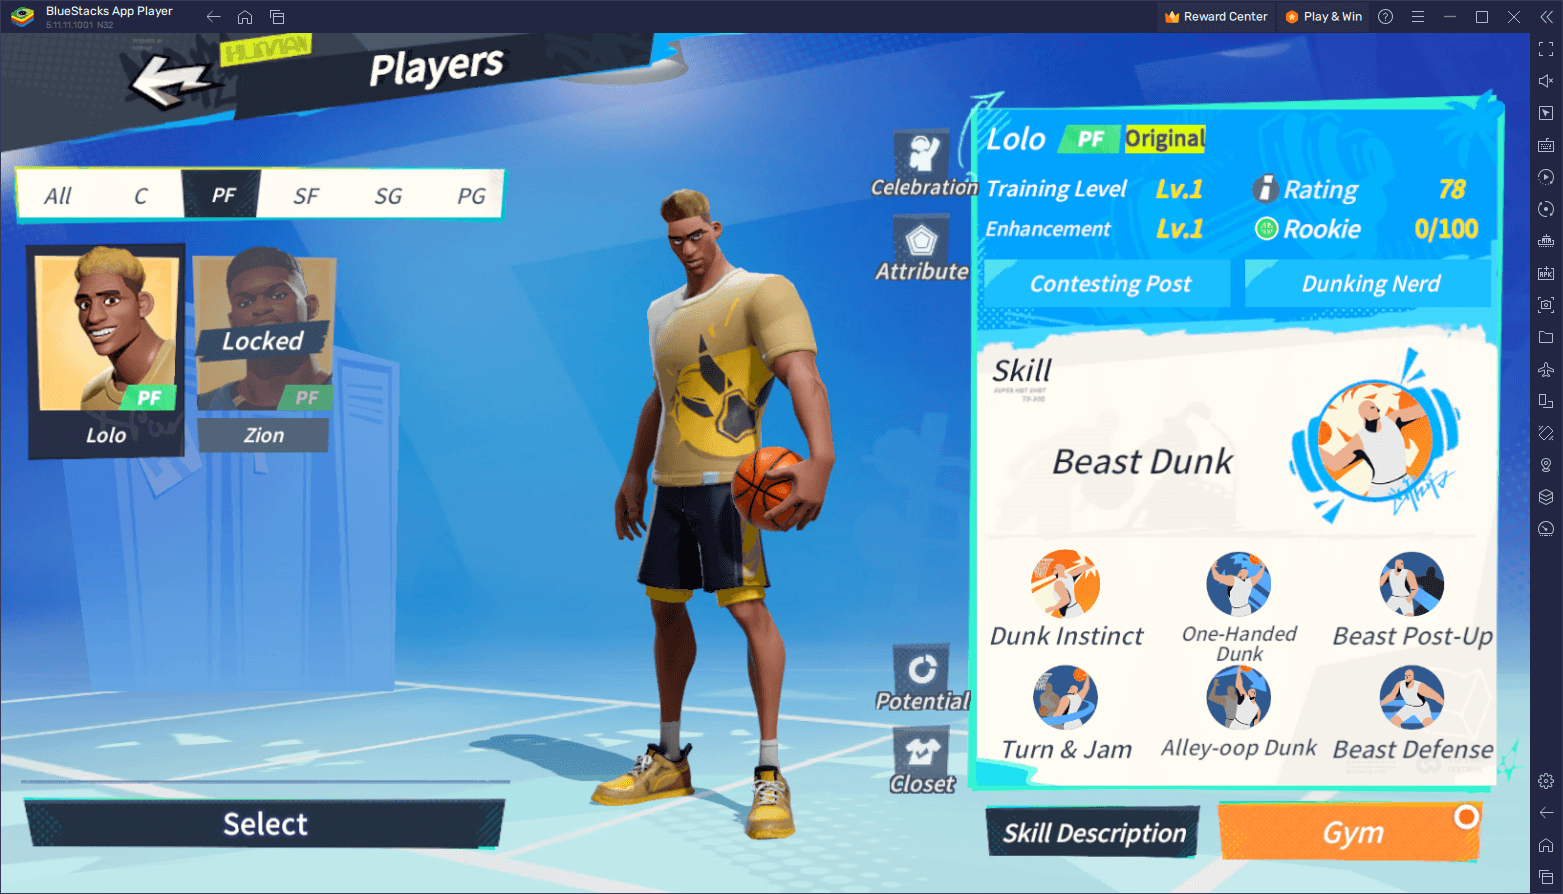 Dunk City Dynasty Positions Guide - The Different Player Roles and Their Play Styles Explained